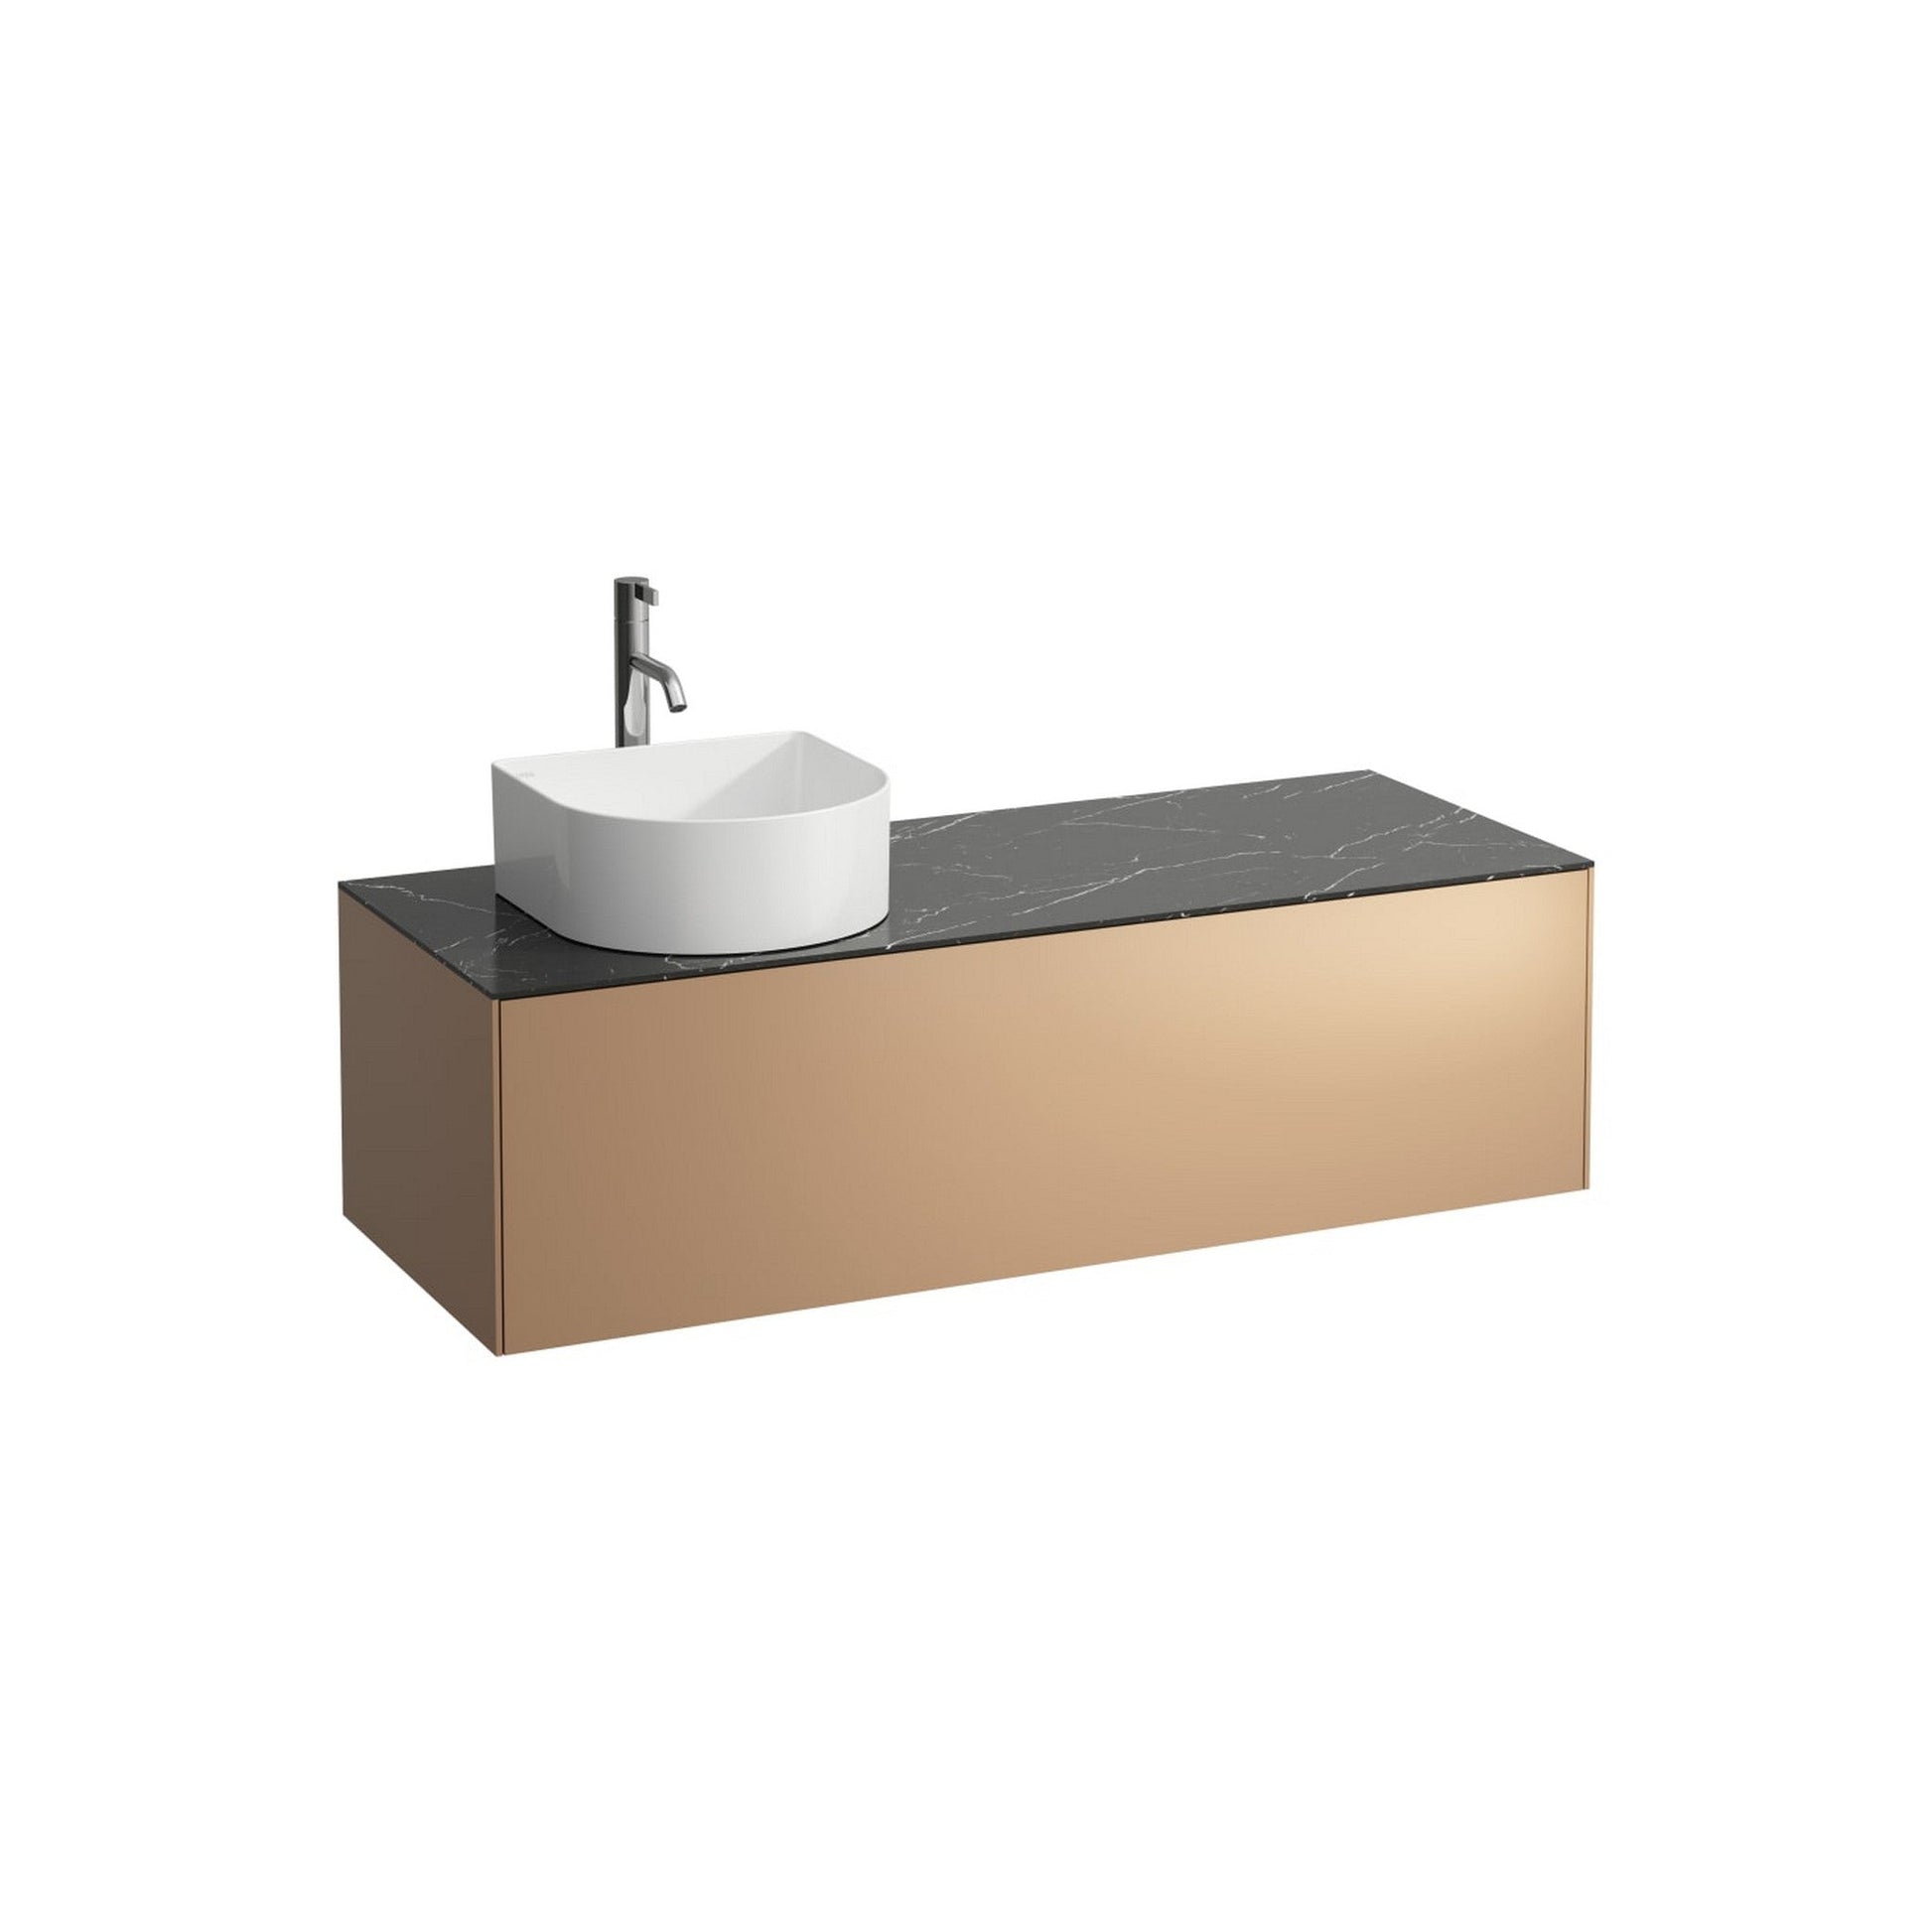 Laufen Sonar 46" 1-Drawer Copper Wall-Mounted Vanity With Nero Marquina Marble Top, Sink Cut-out on the Left, Pre-drilled Faucet Hole